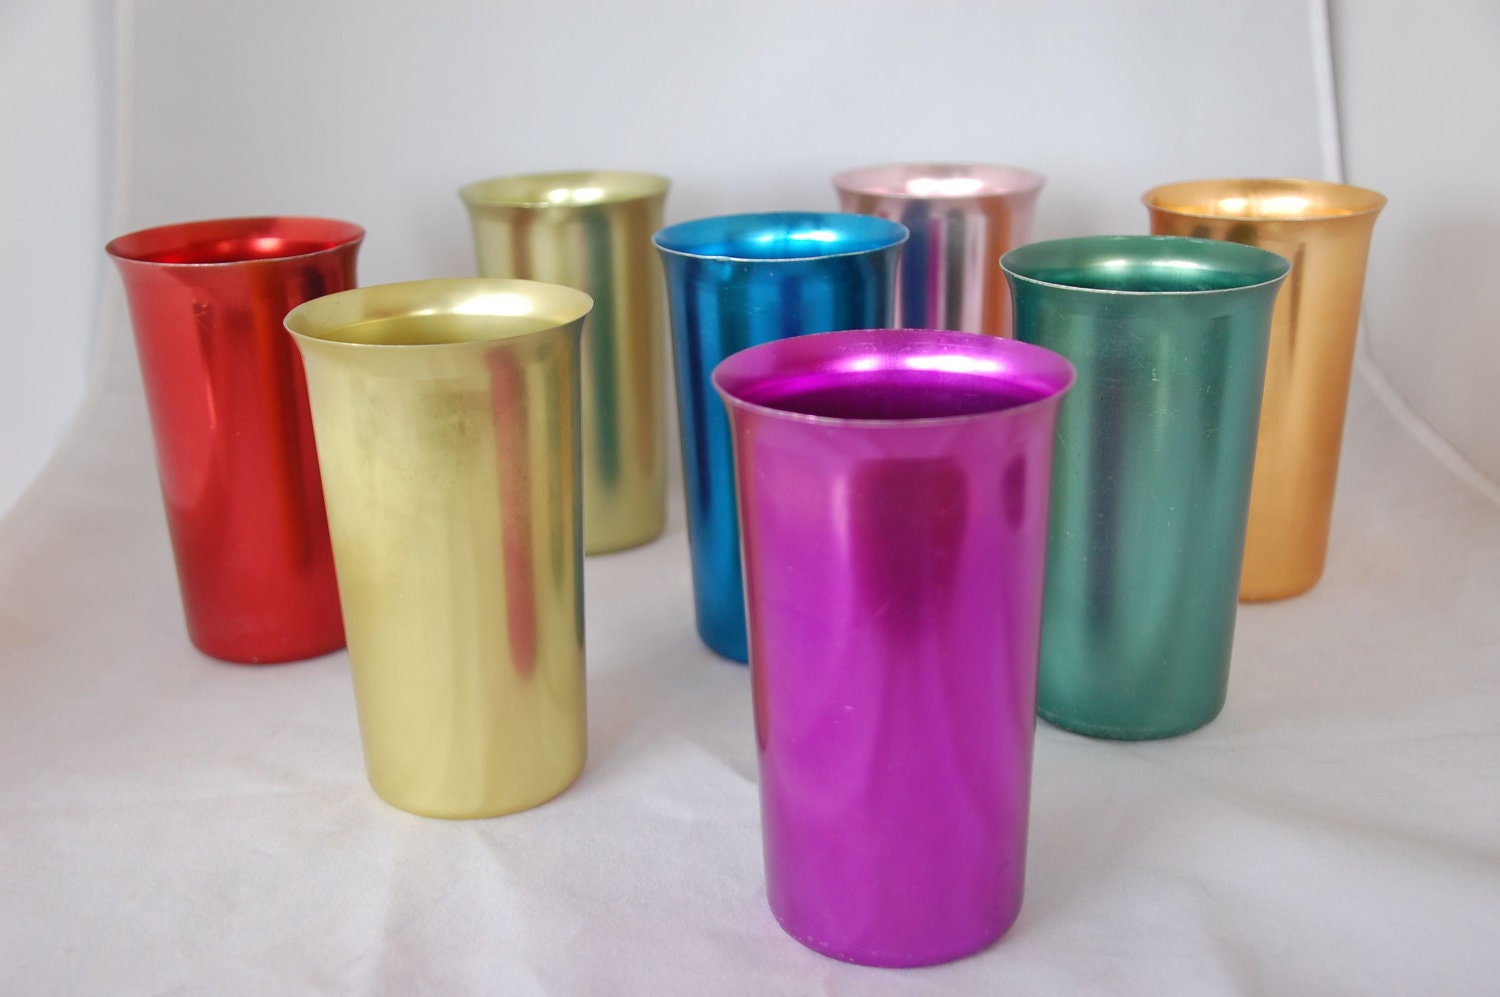 tumblers etsy aluminum tumblers set colored of cups Anohue 8